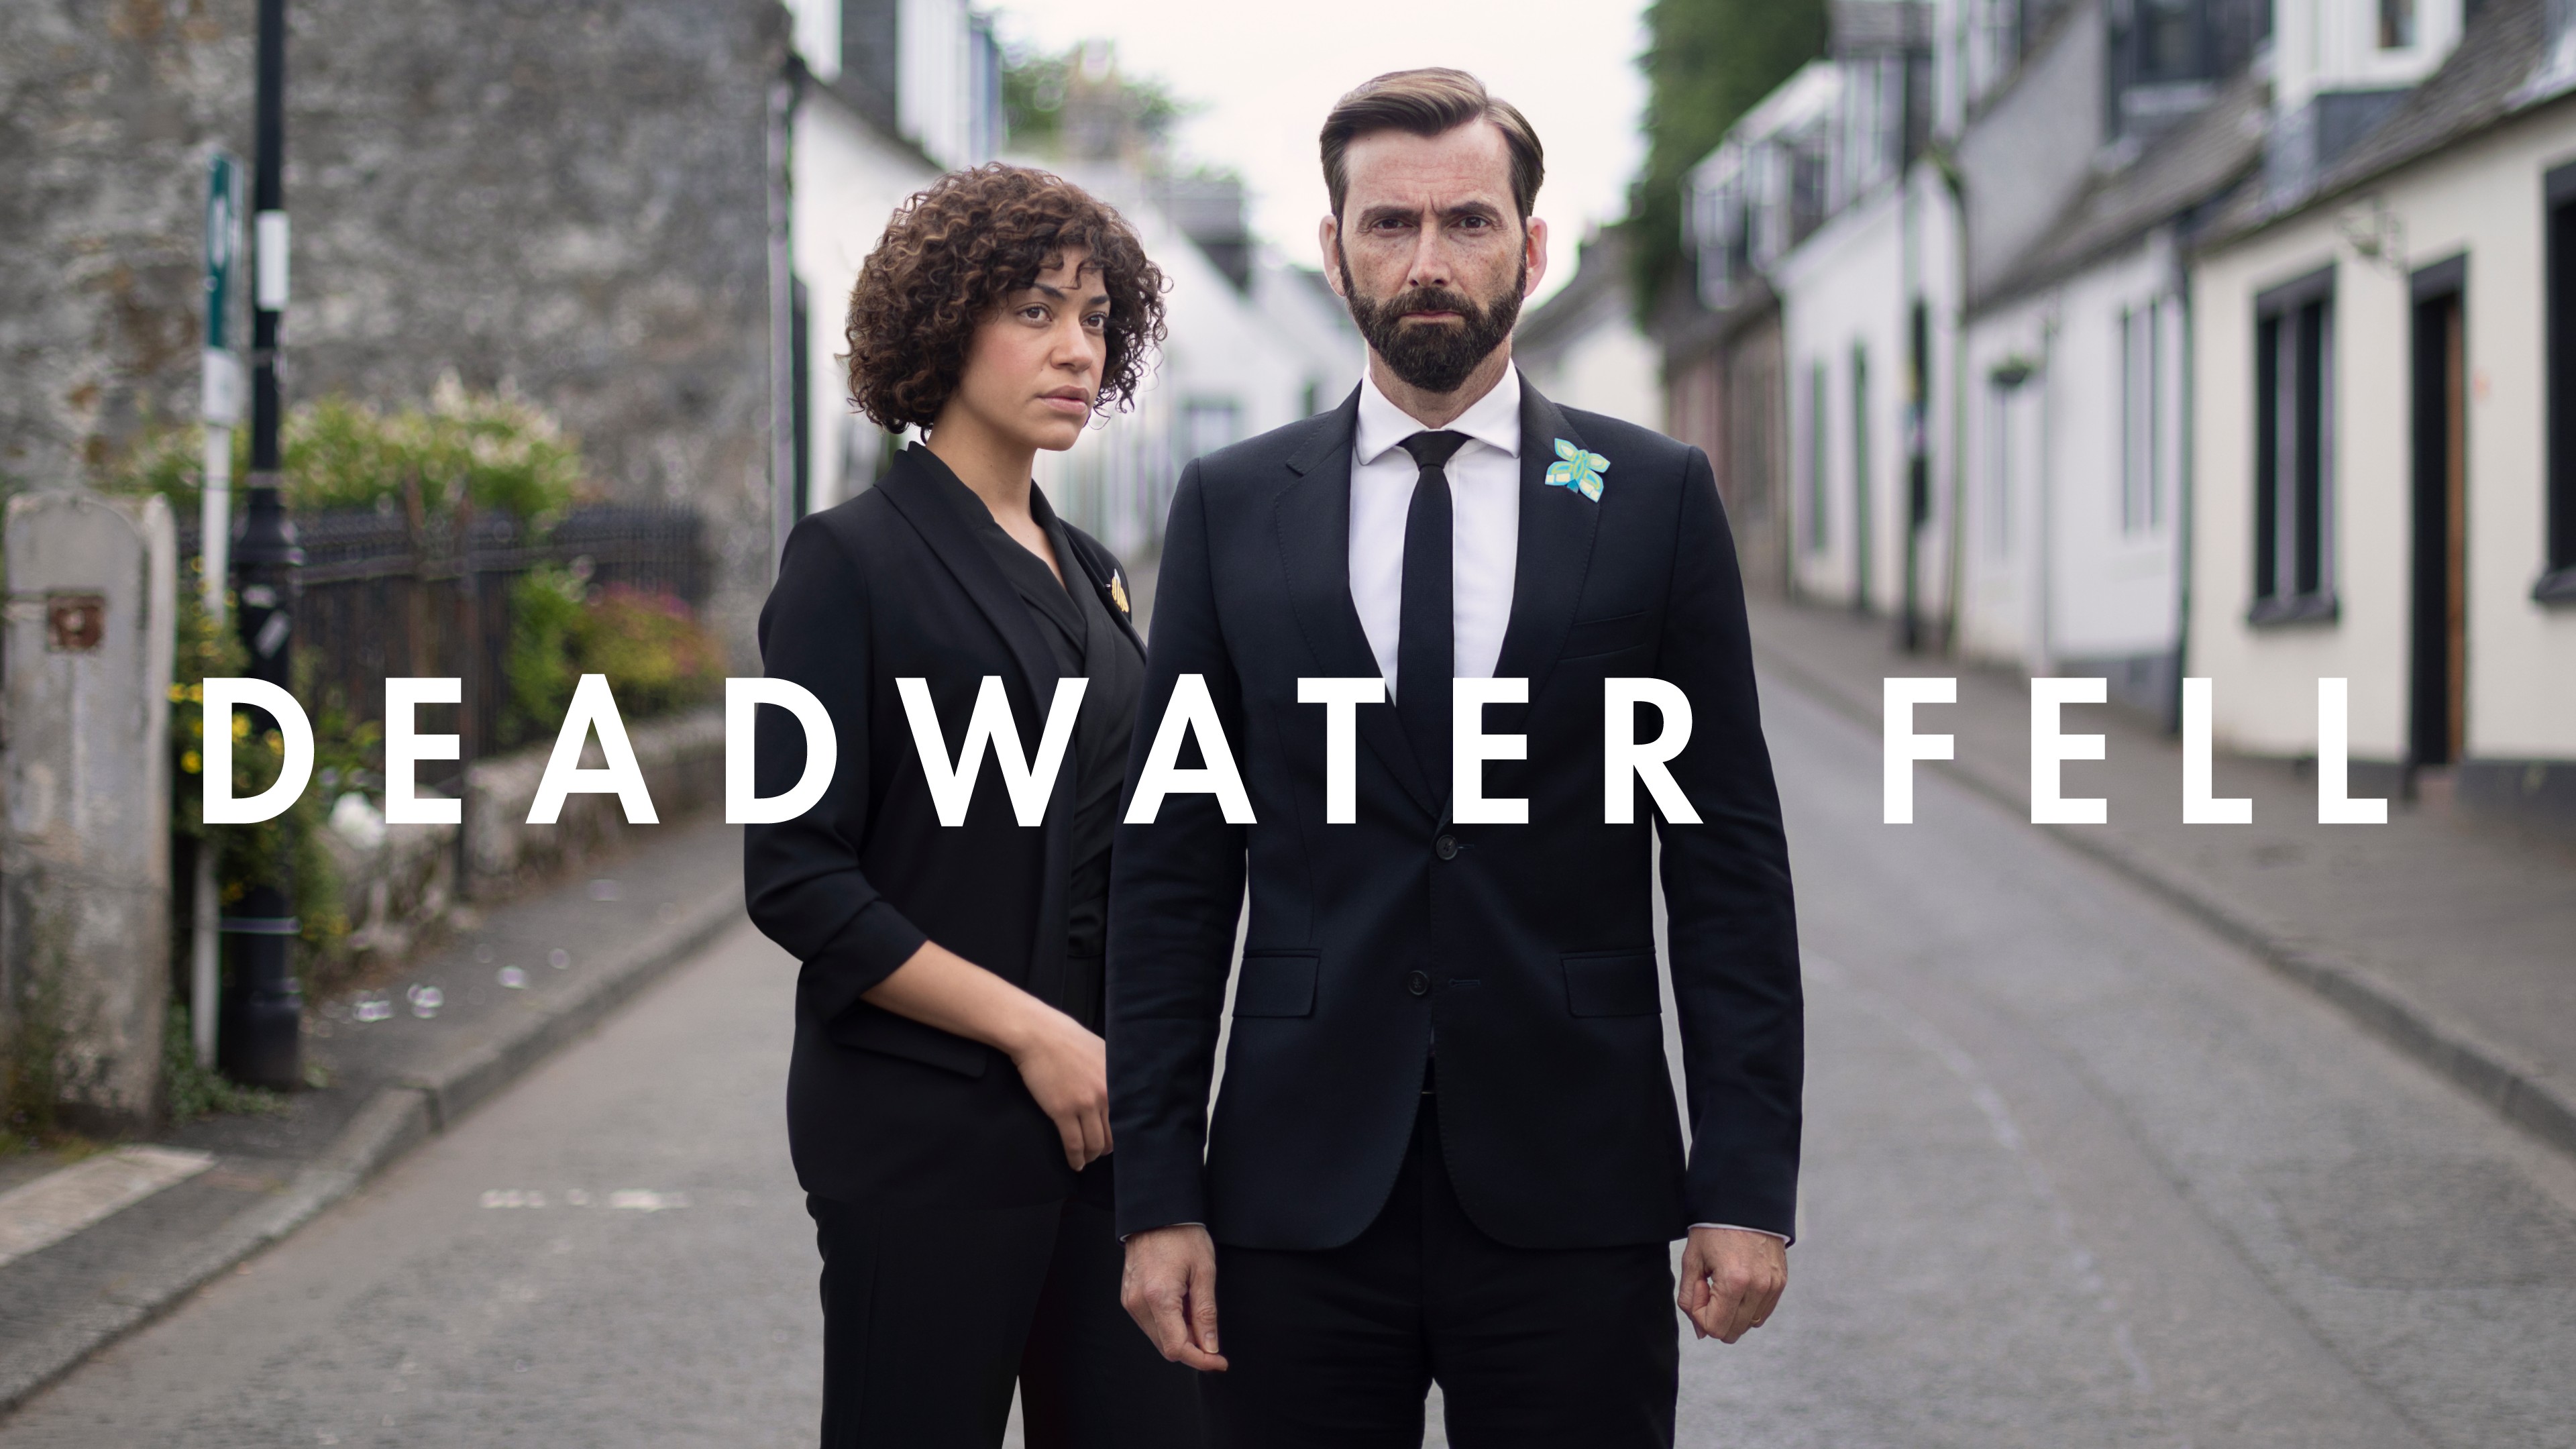 Deadwater Fell Crime Drama Shows To Watch If You Liked Broadchurch